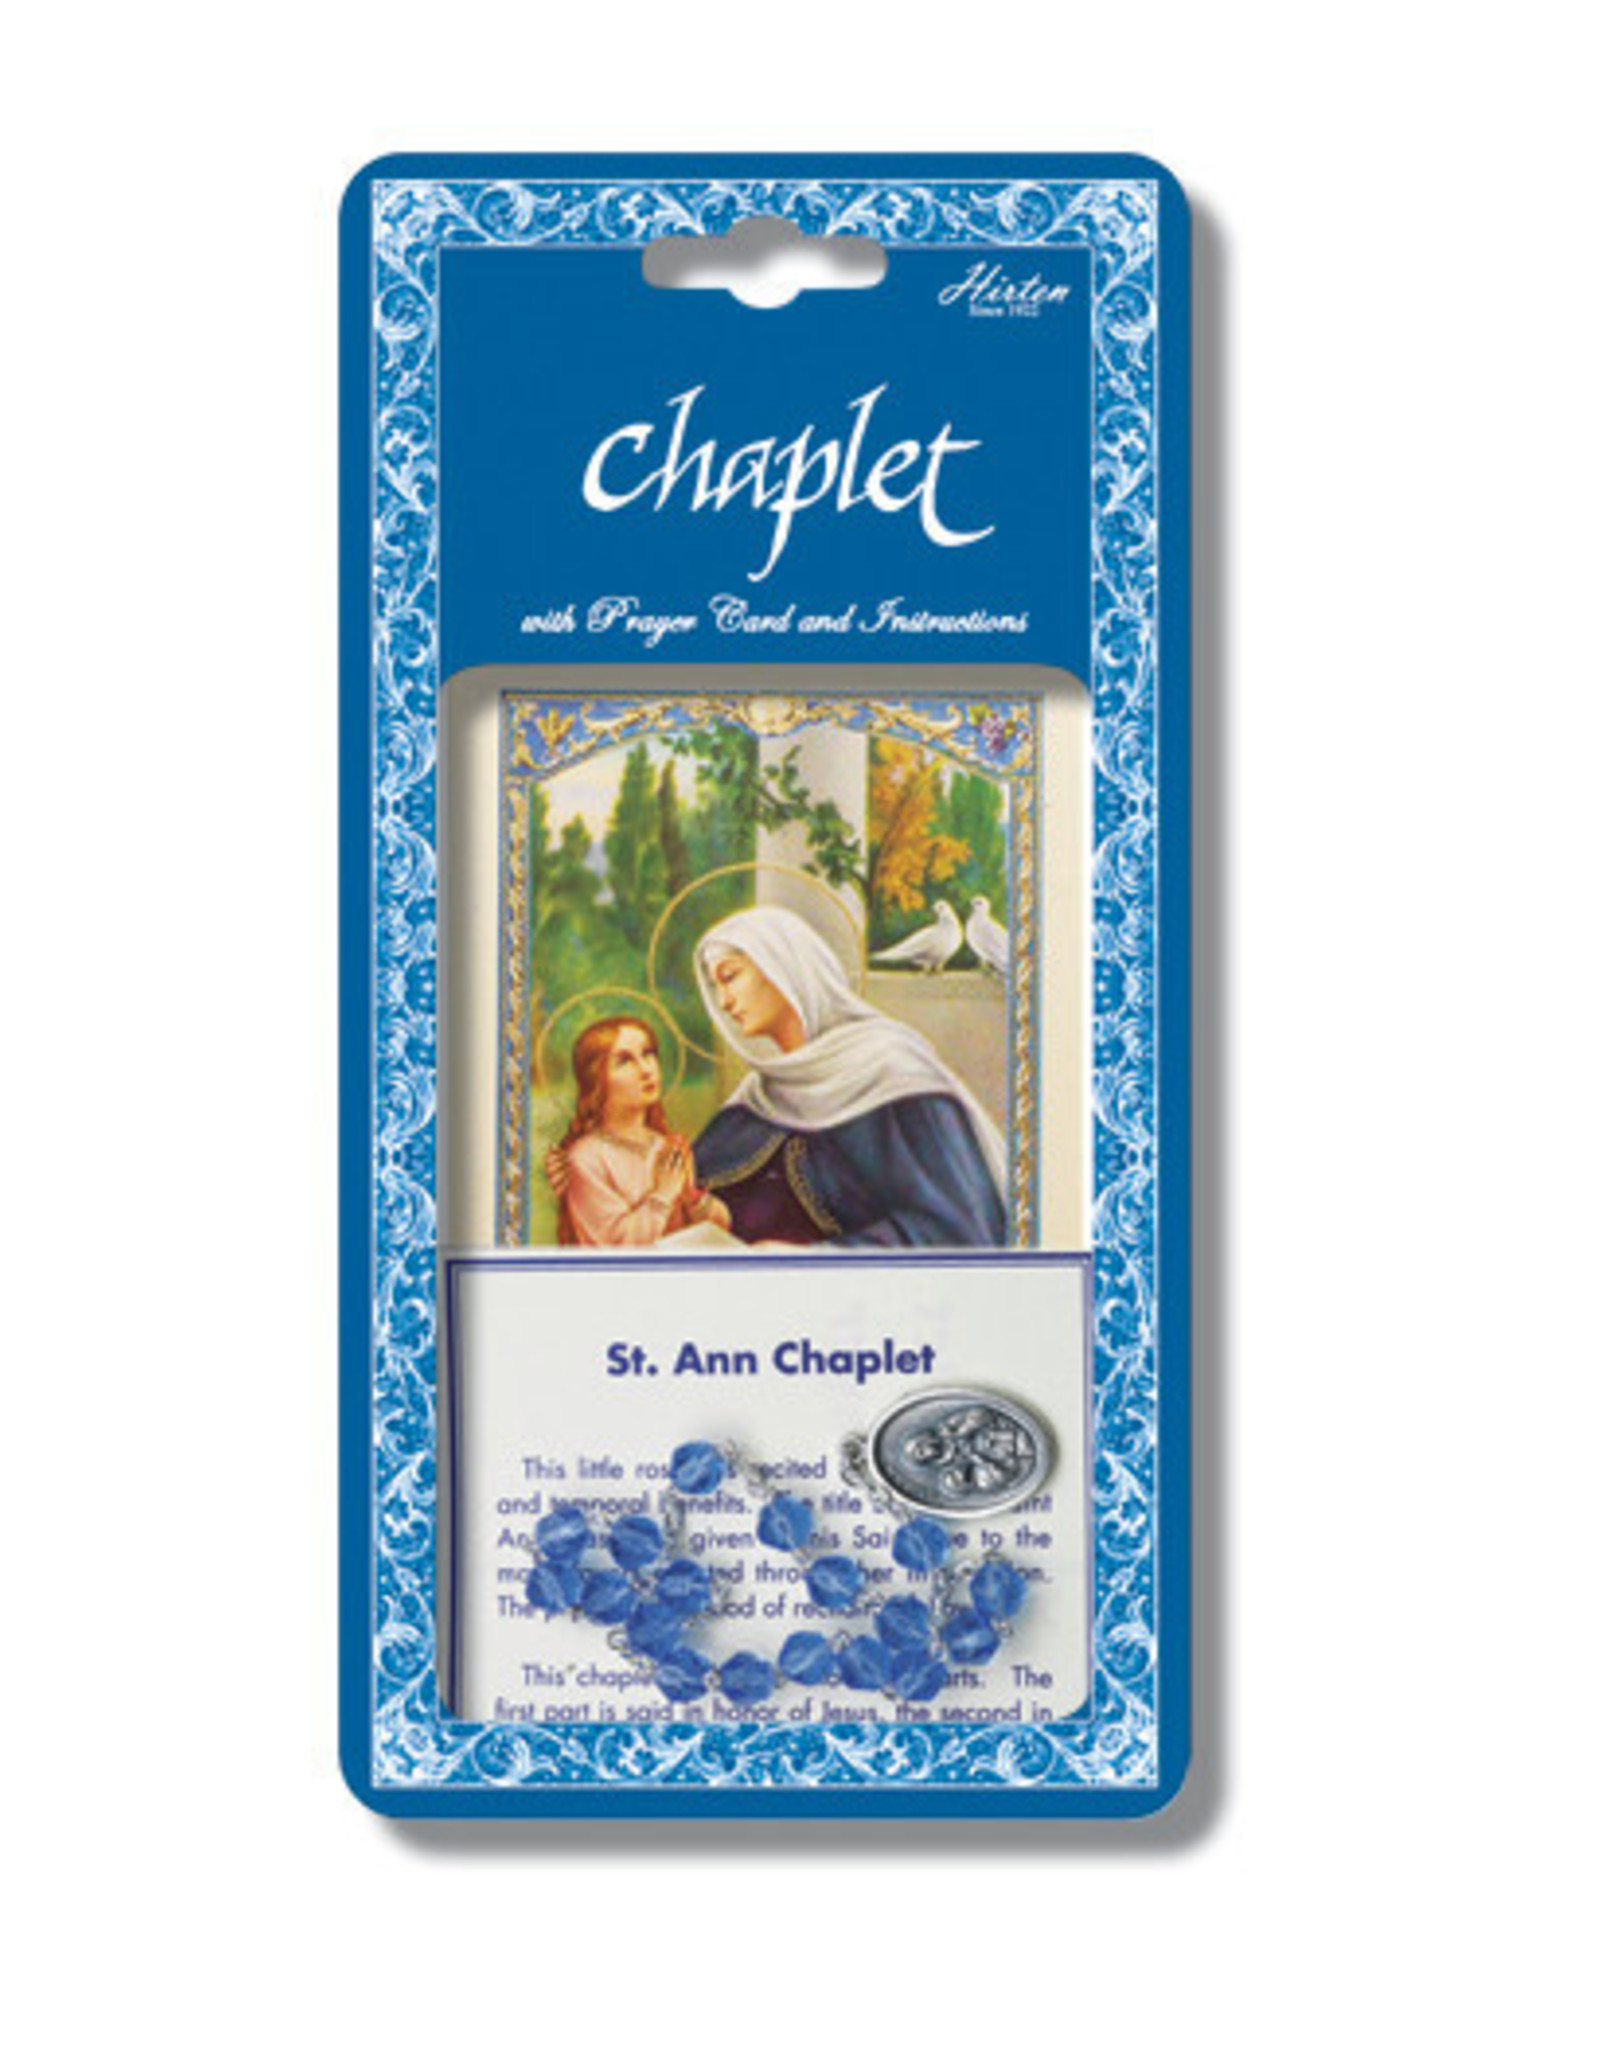 Hirten St. Anne Chaplet with Prayer Card and Instructions